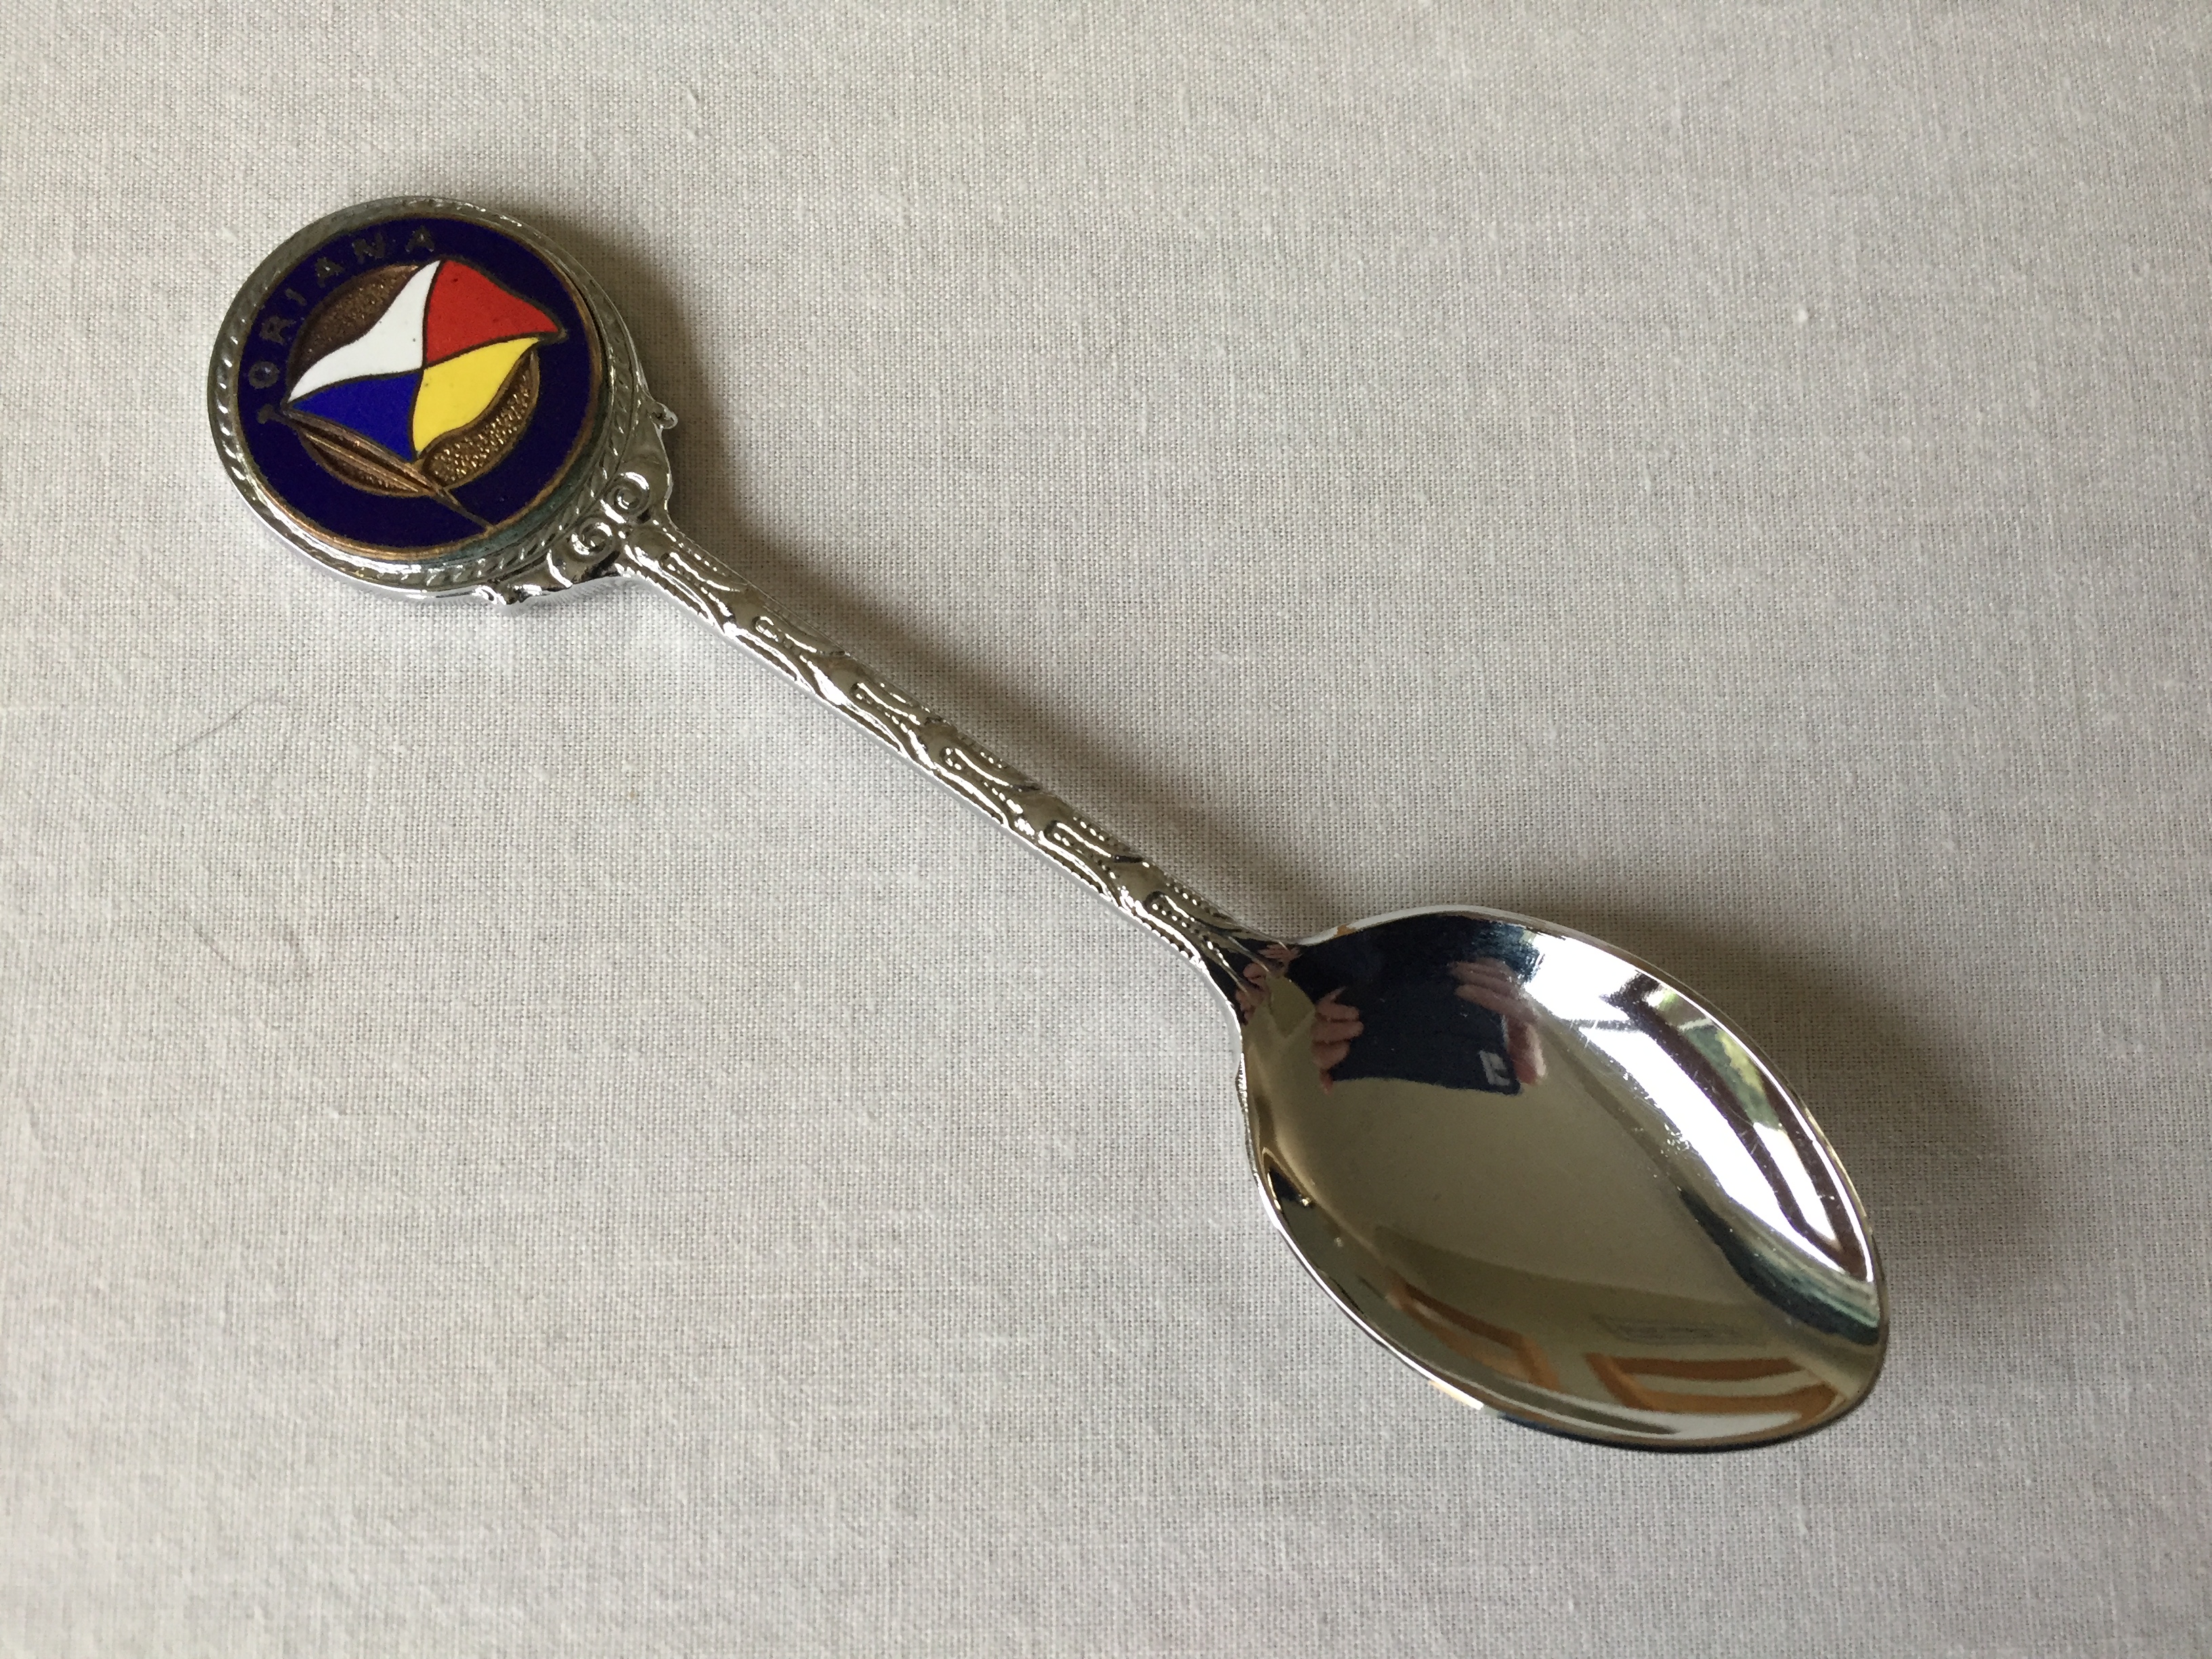 SOUVENIR SPOON FROM THE P&O LINE VESSEL THE SS ORIANA